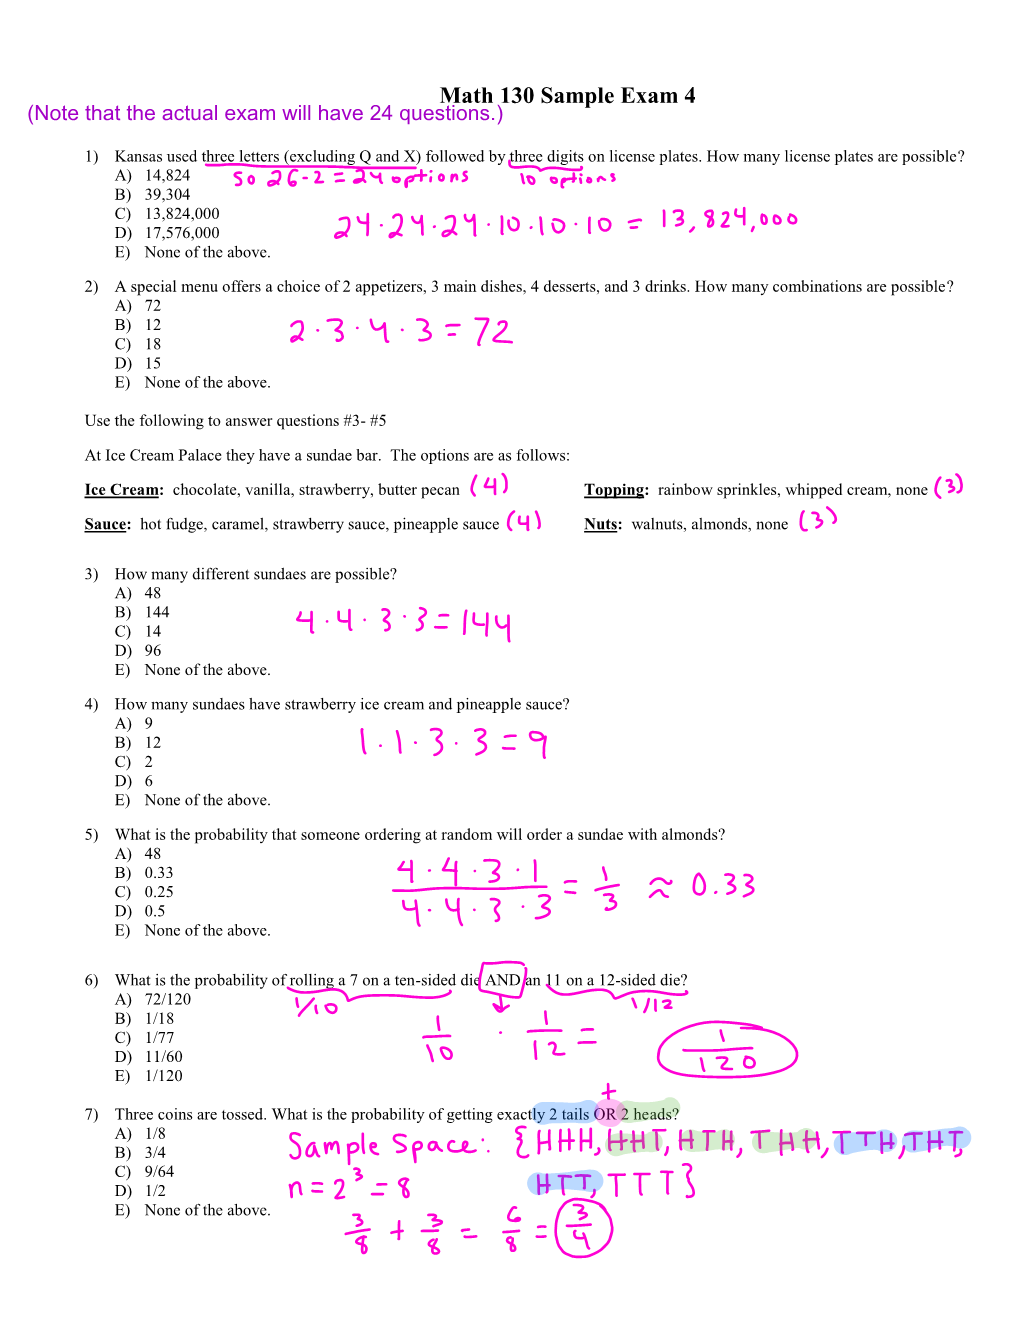 Math 130 Sample Exam 4 (Note That the Actual Exam Will Have 24 Questions.)